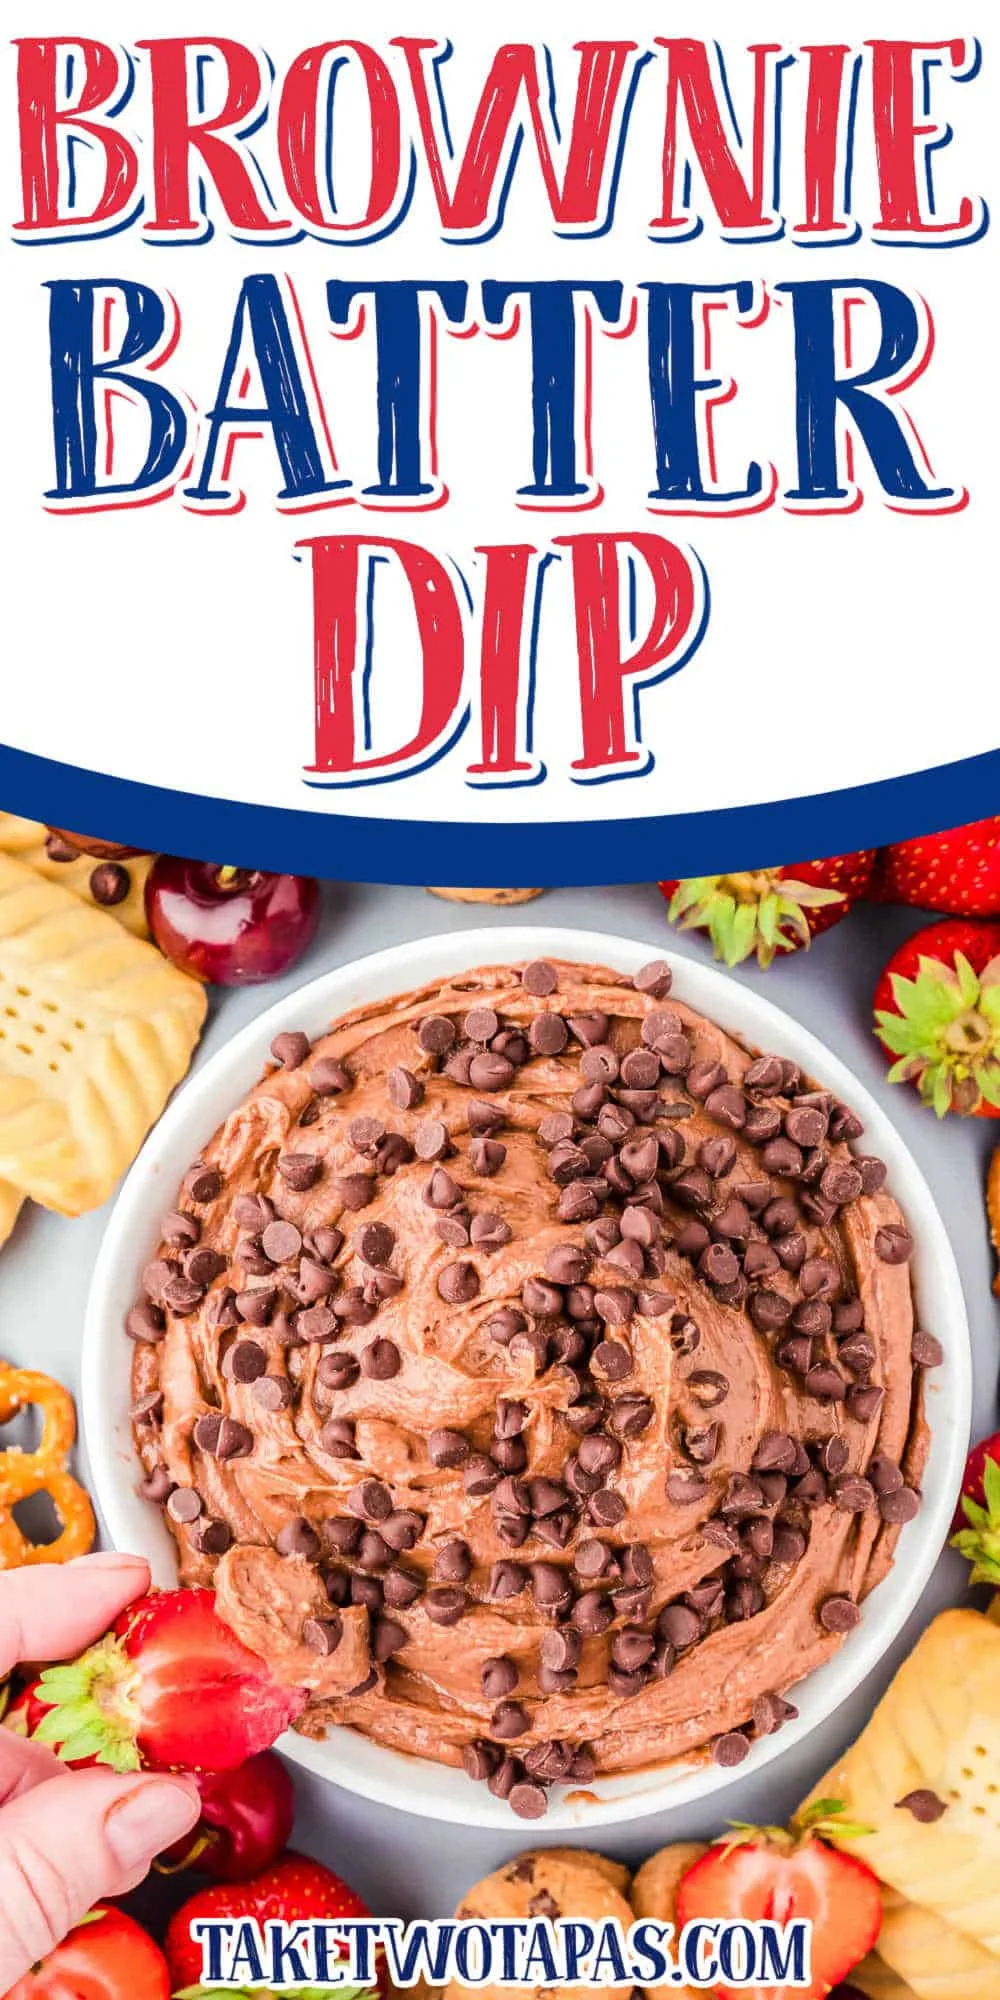 bowl of dip with text "Brownie Batter Dip" on a white banner